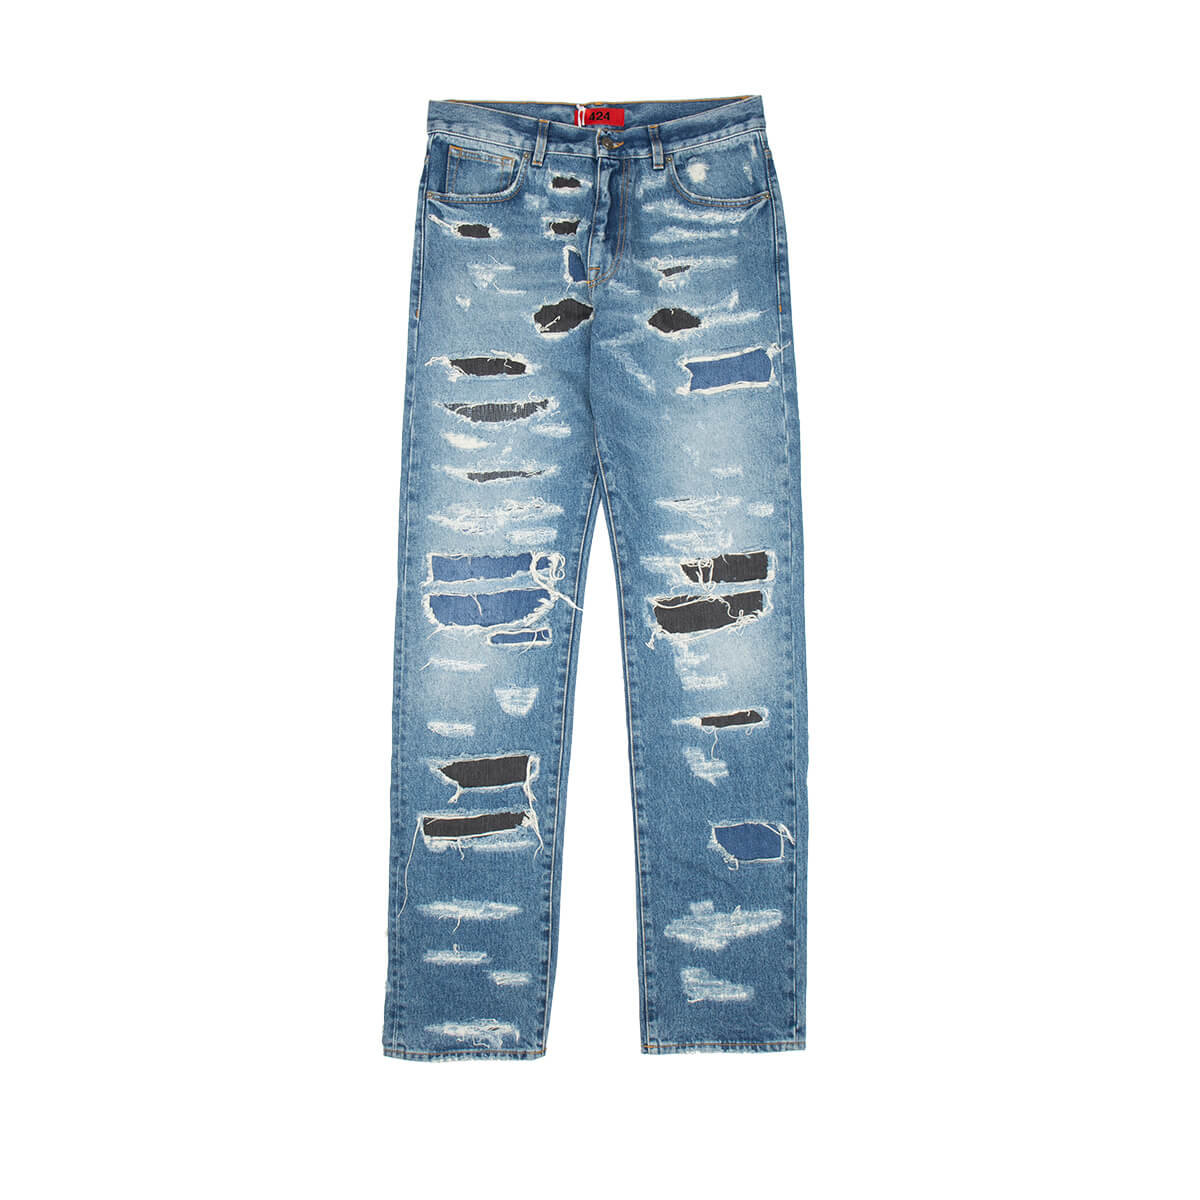 FourTwoFour on Fairfax Destroyed Jeans